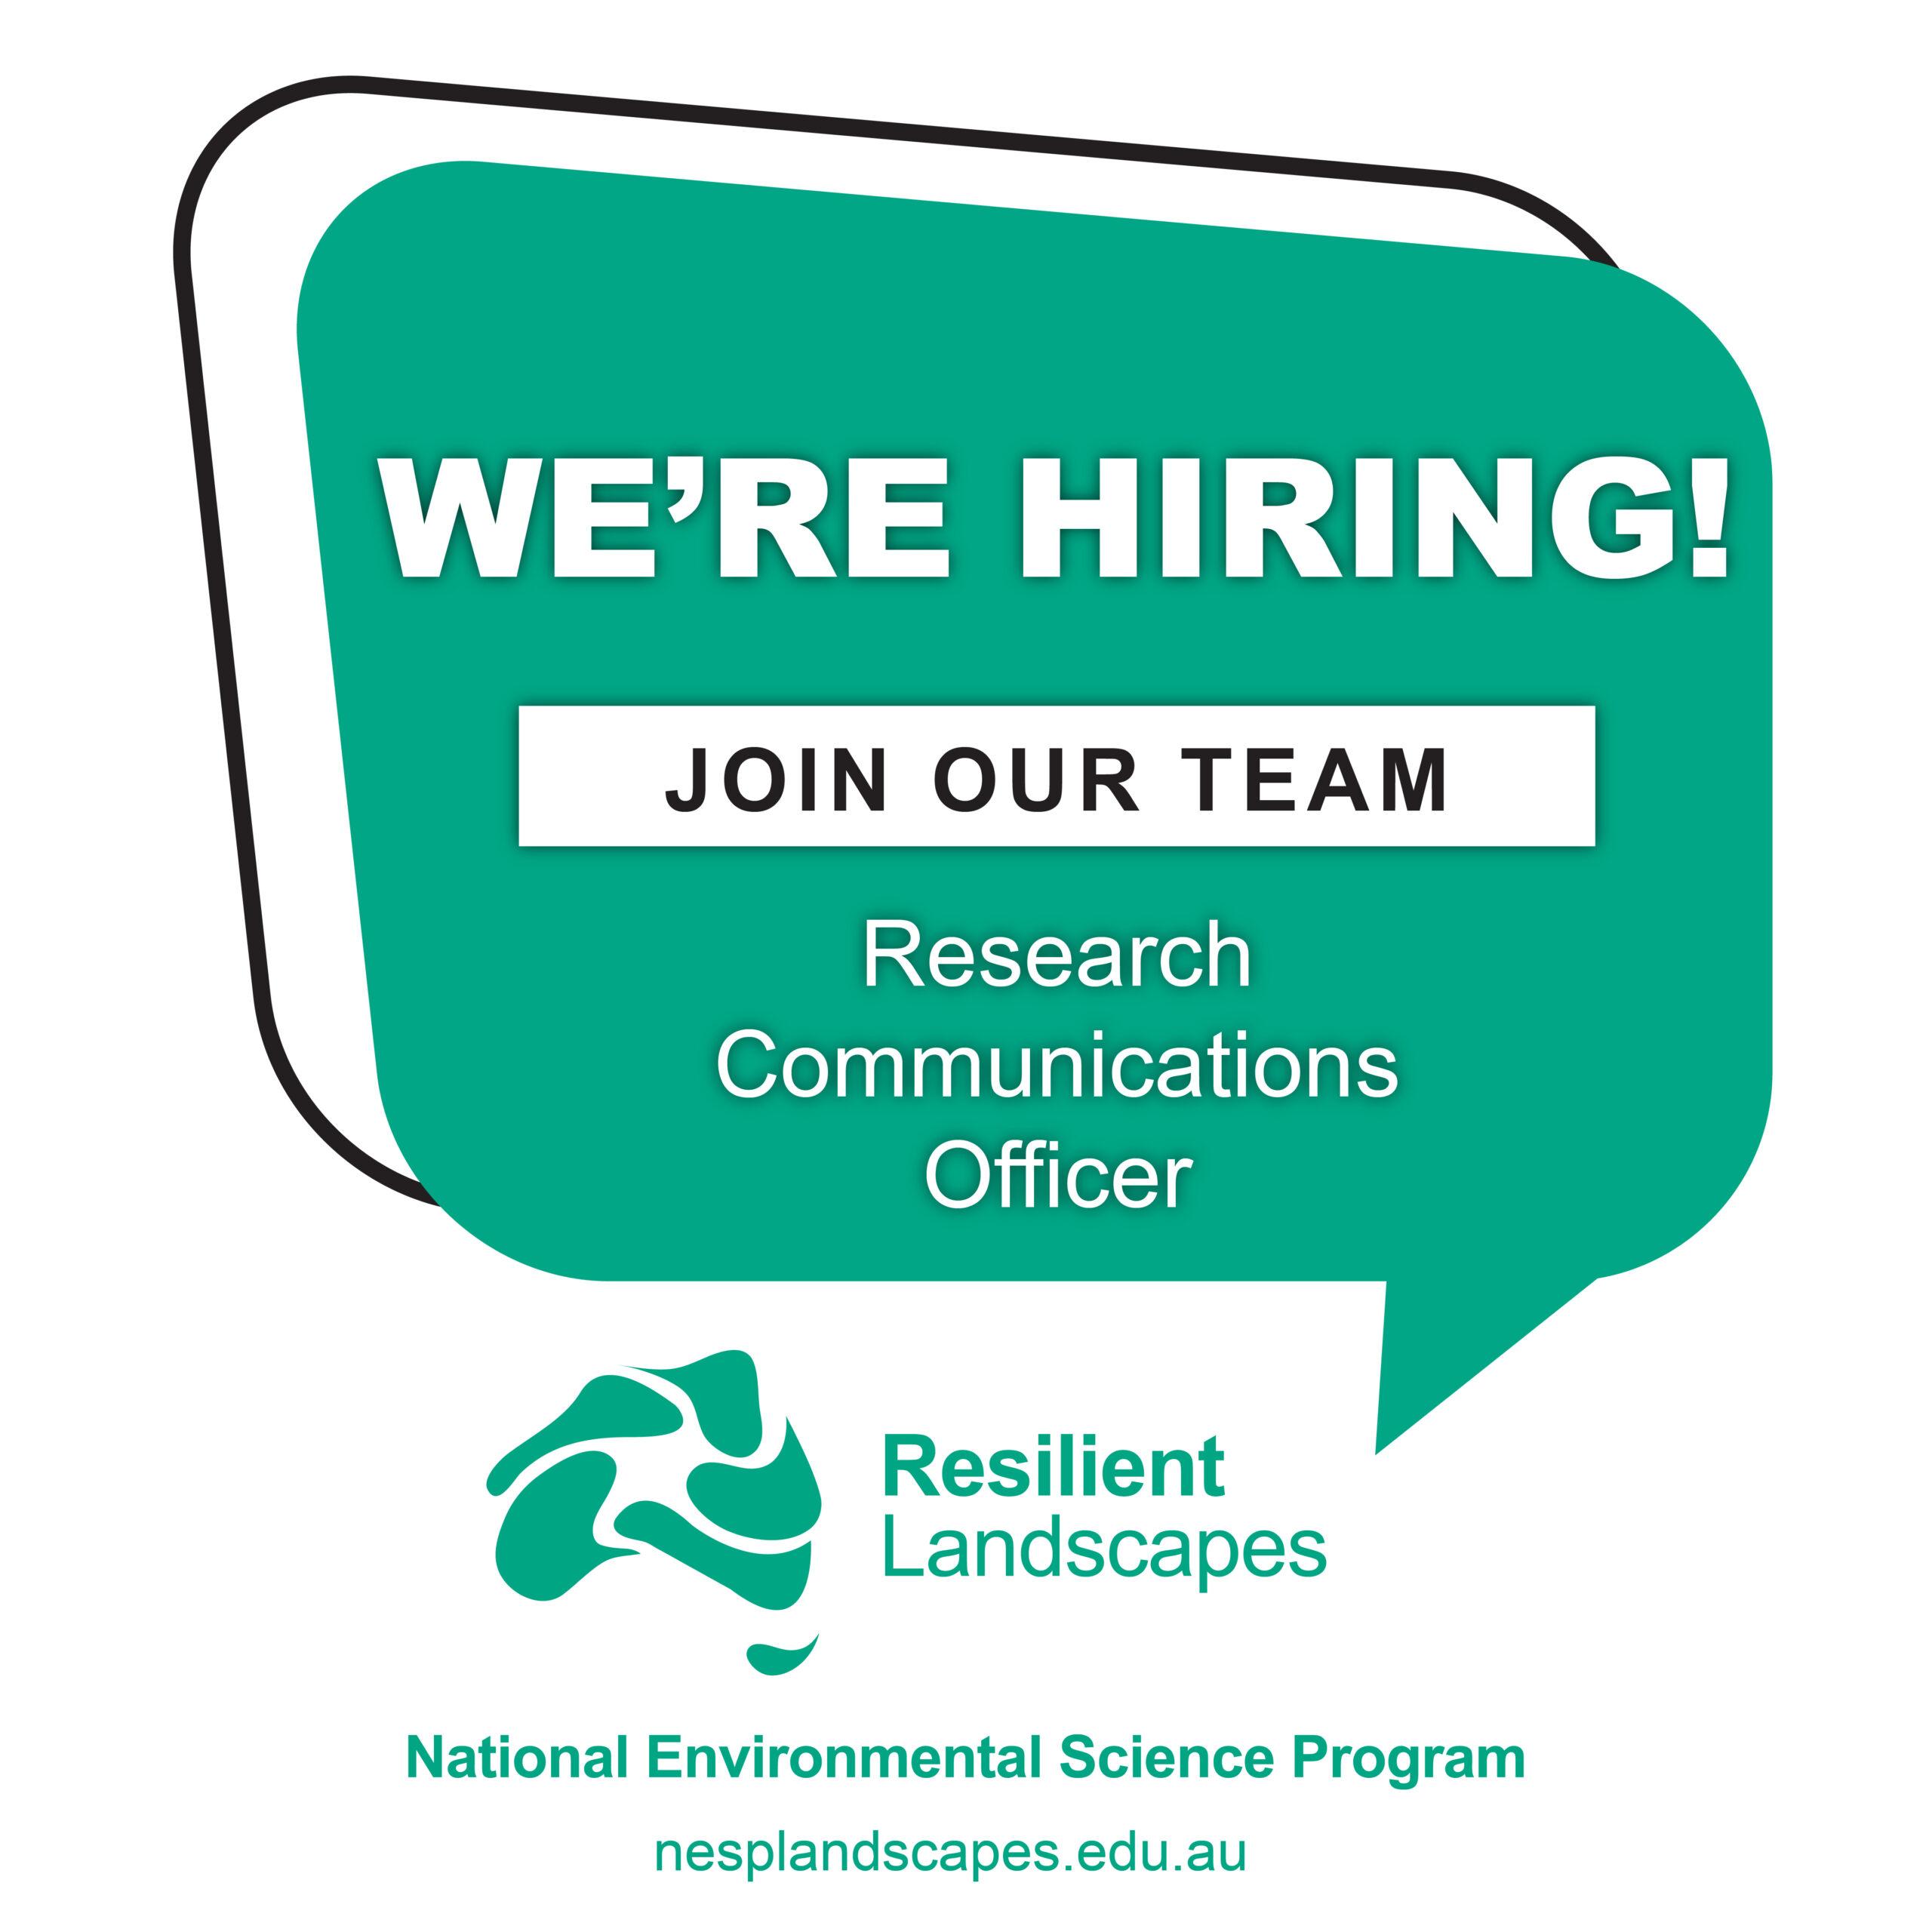 We're hiring a Research Communications Officer